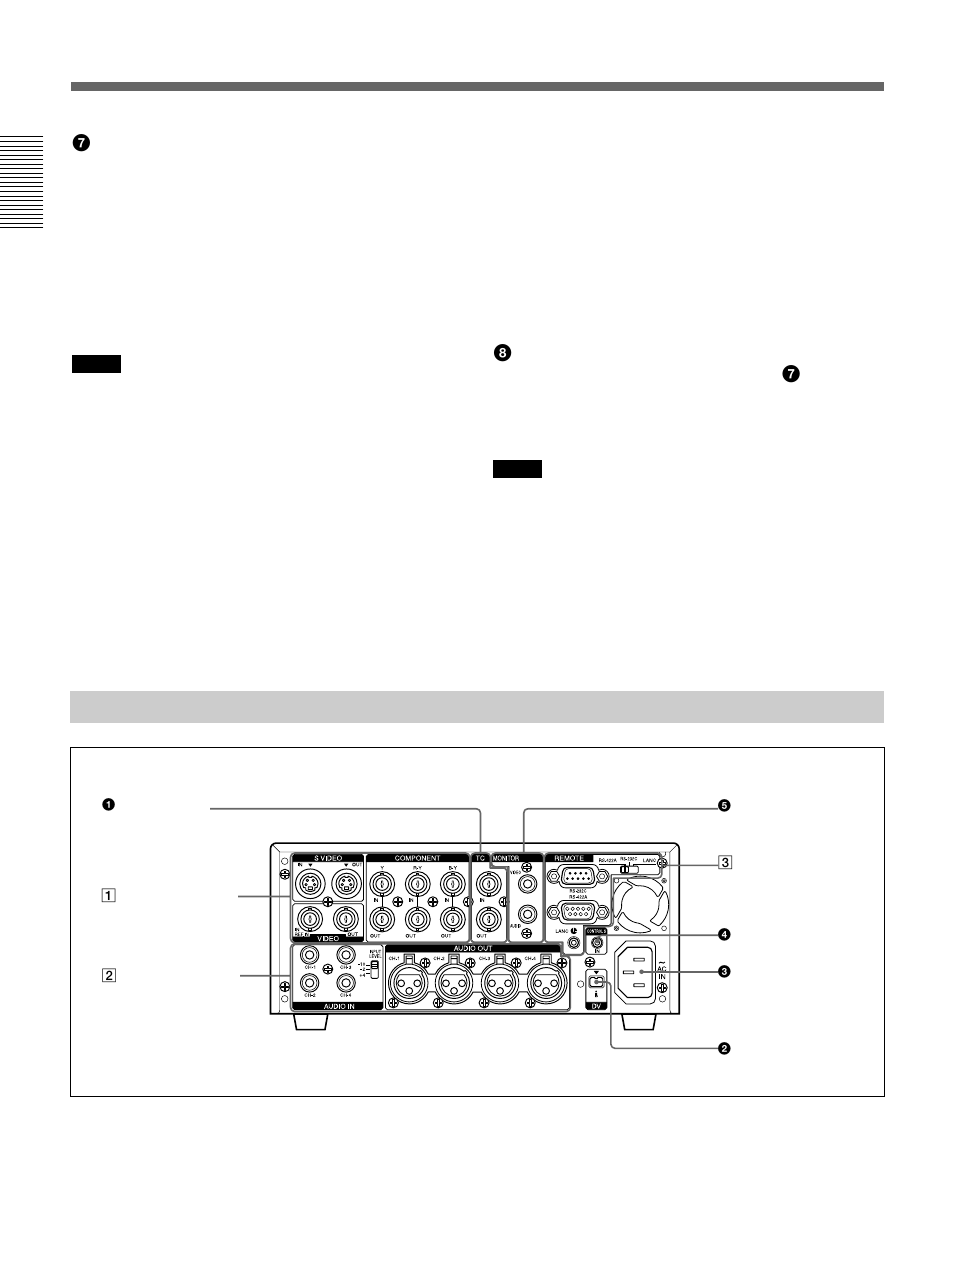 Rear panel, Location and function of parts | Sony DSR-45/45P Manuel d'utilisation | Page 20 / 220